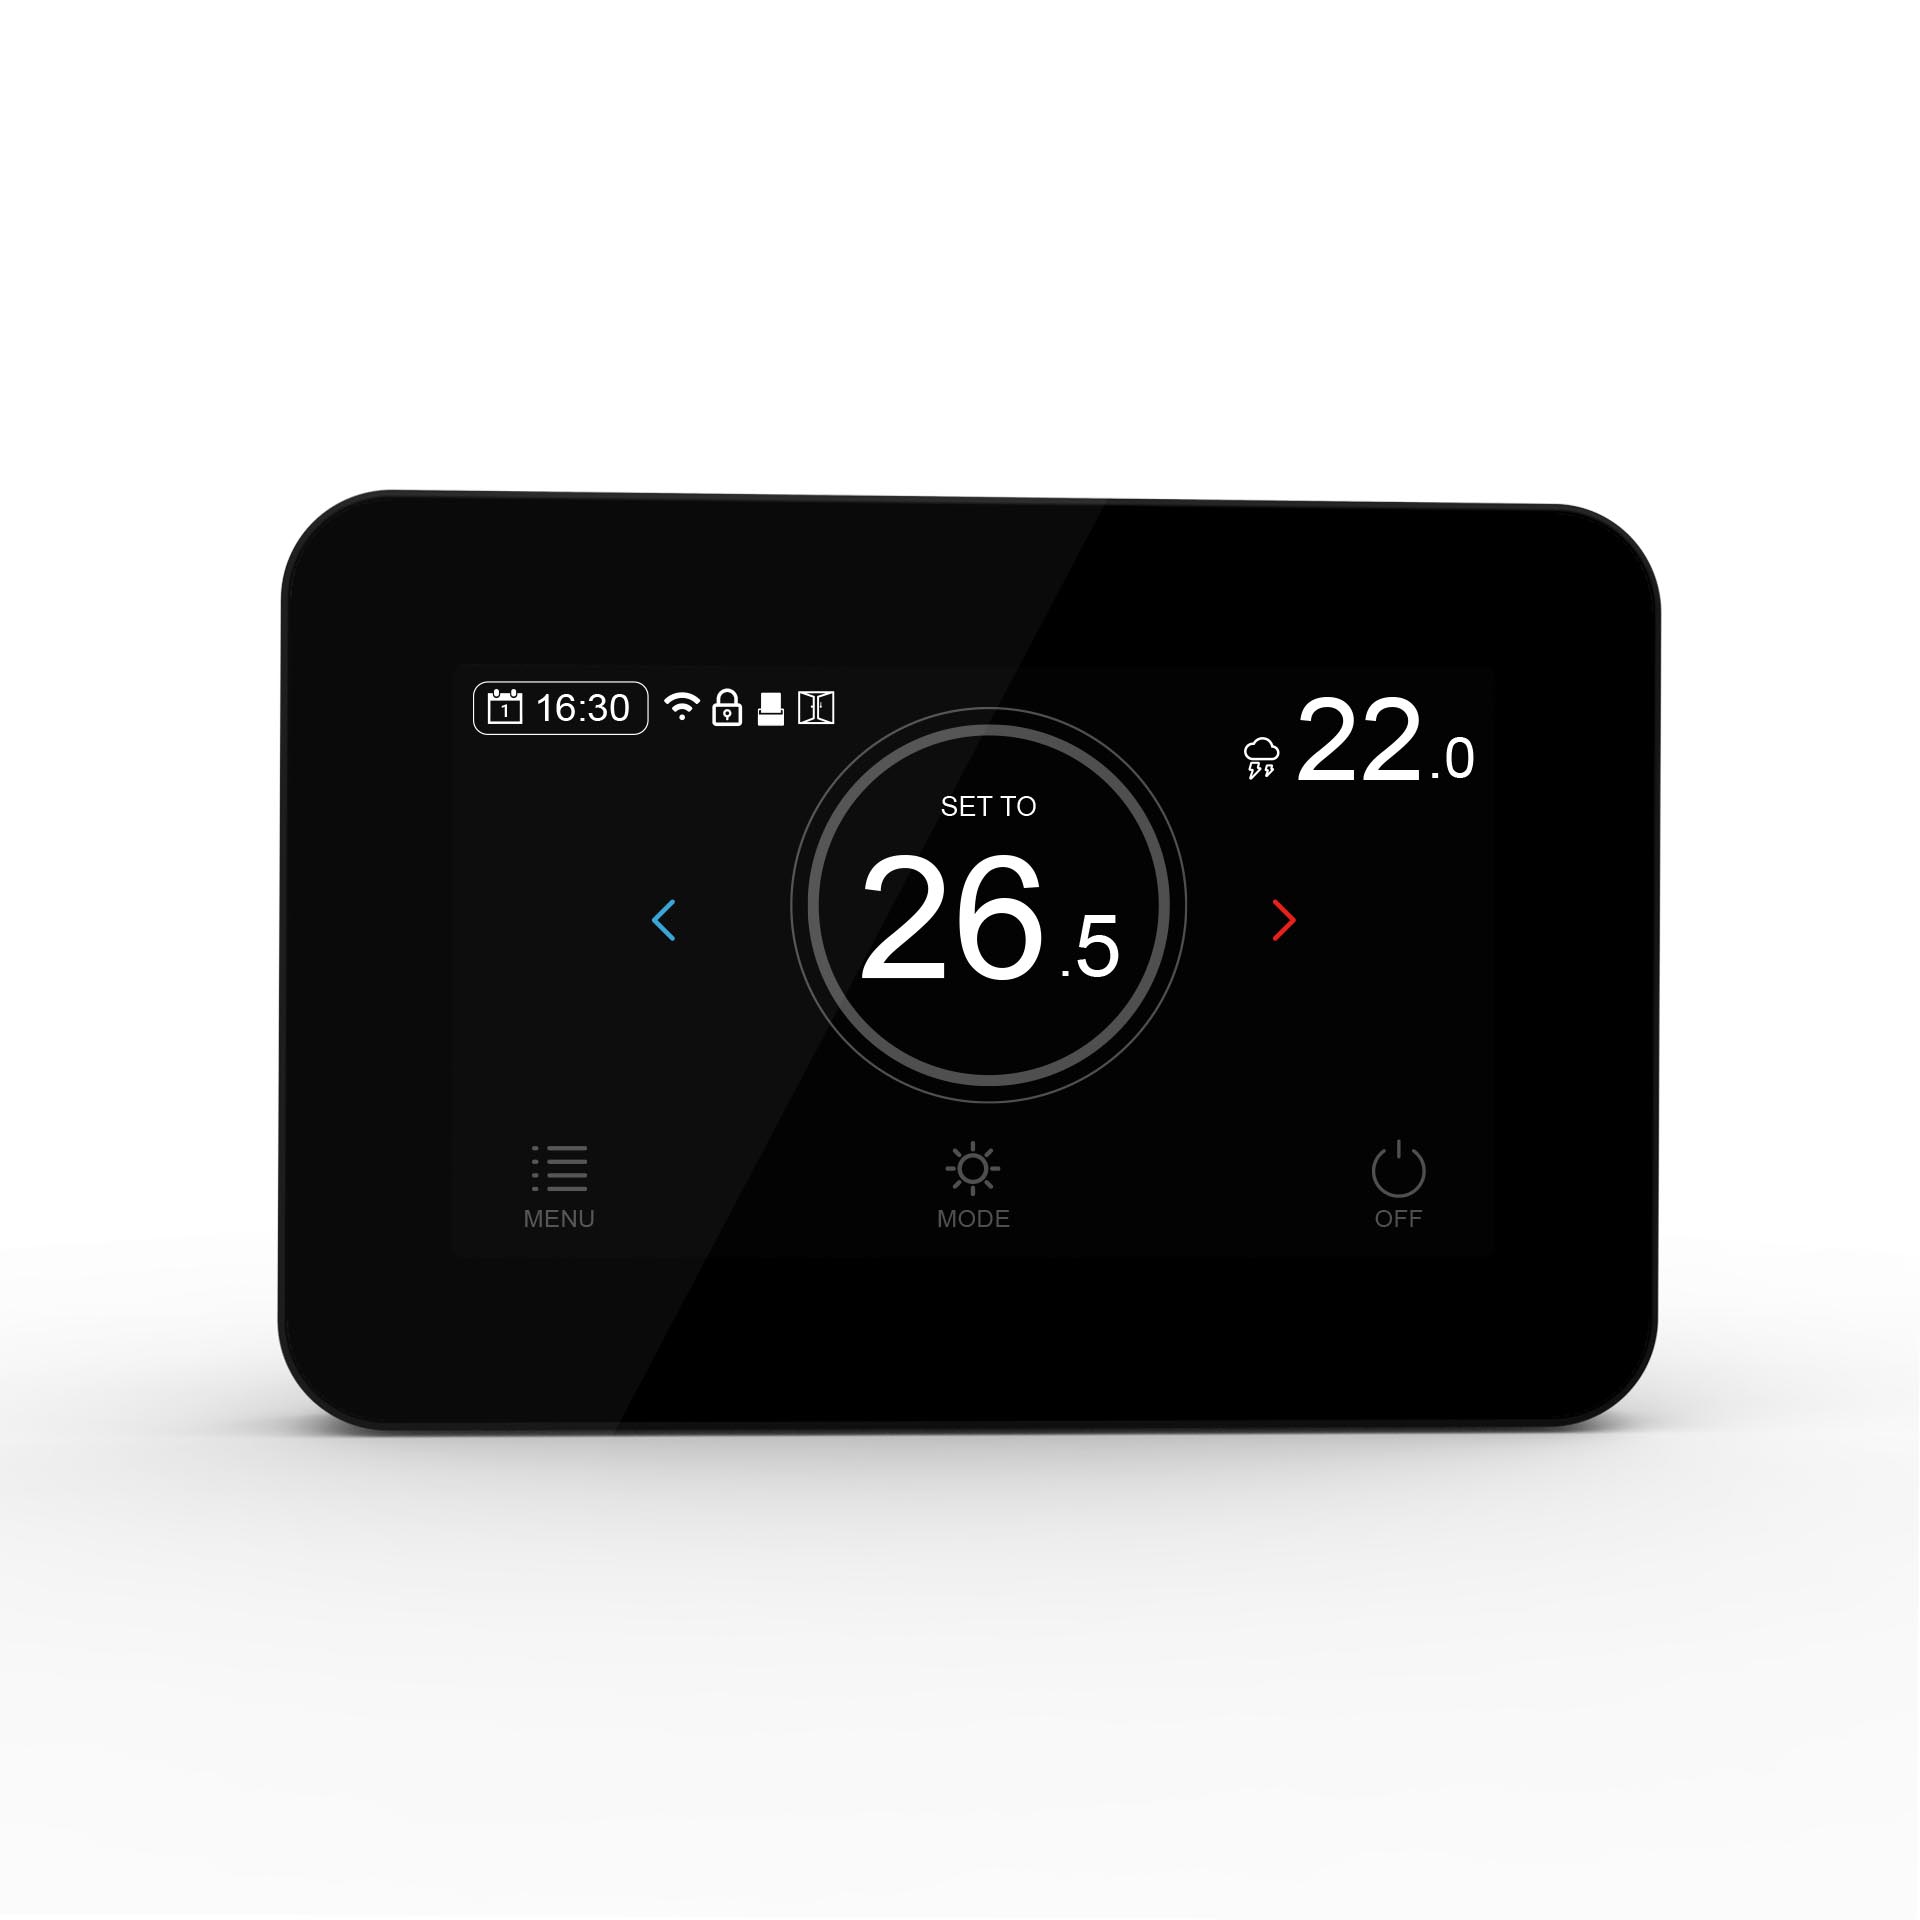 Tuya Smartlife Programmable WiFi Thermost for Air to Water Heat Pump Control